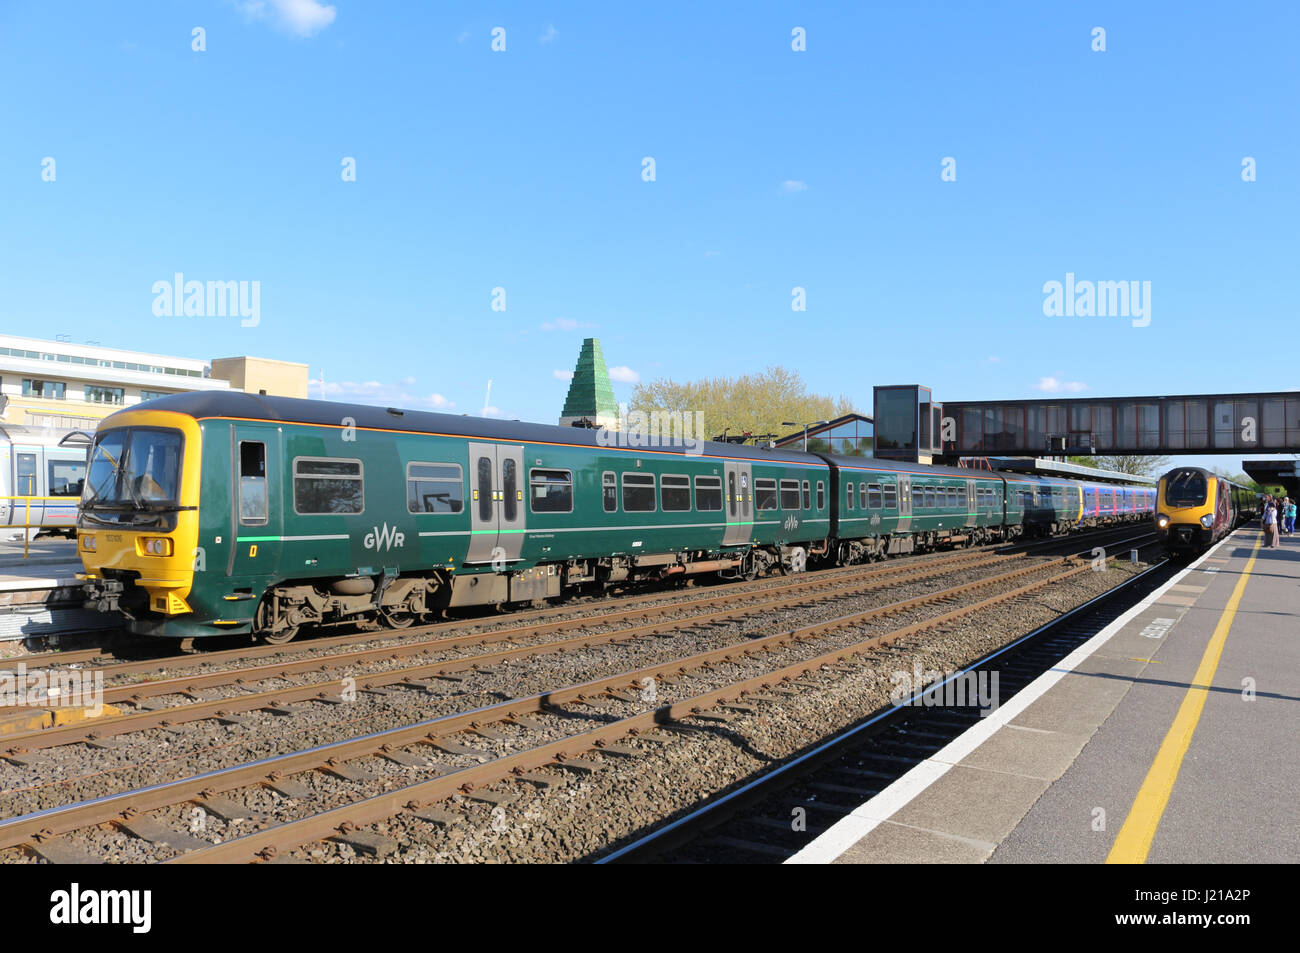 Class 165 turbo diesel multiple unit train in Great Western Railway green livery at Oxford station with passenger service for London Paddington. Stock Photo